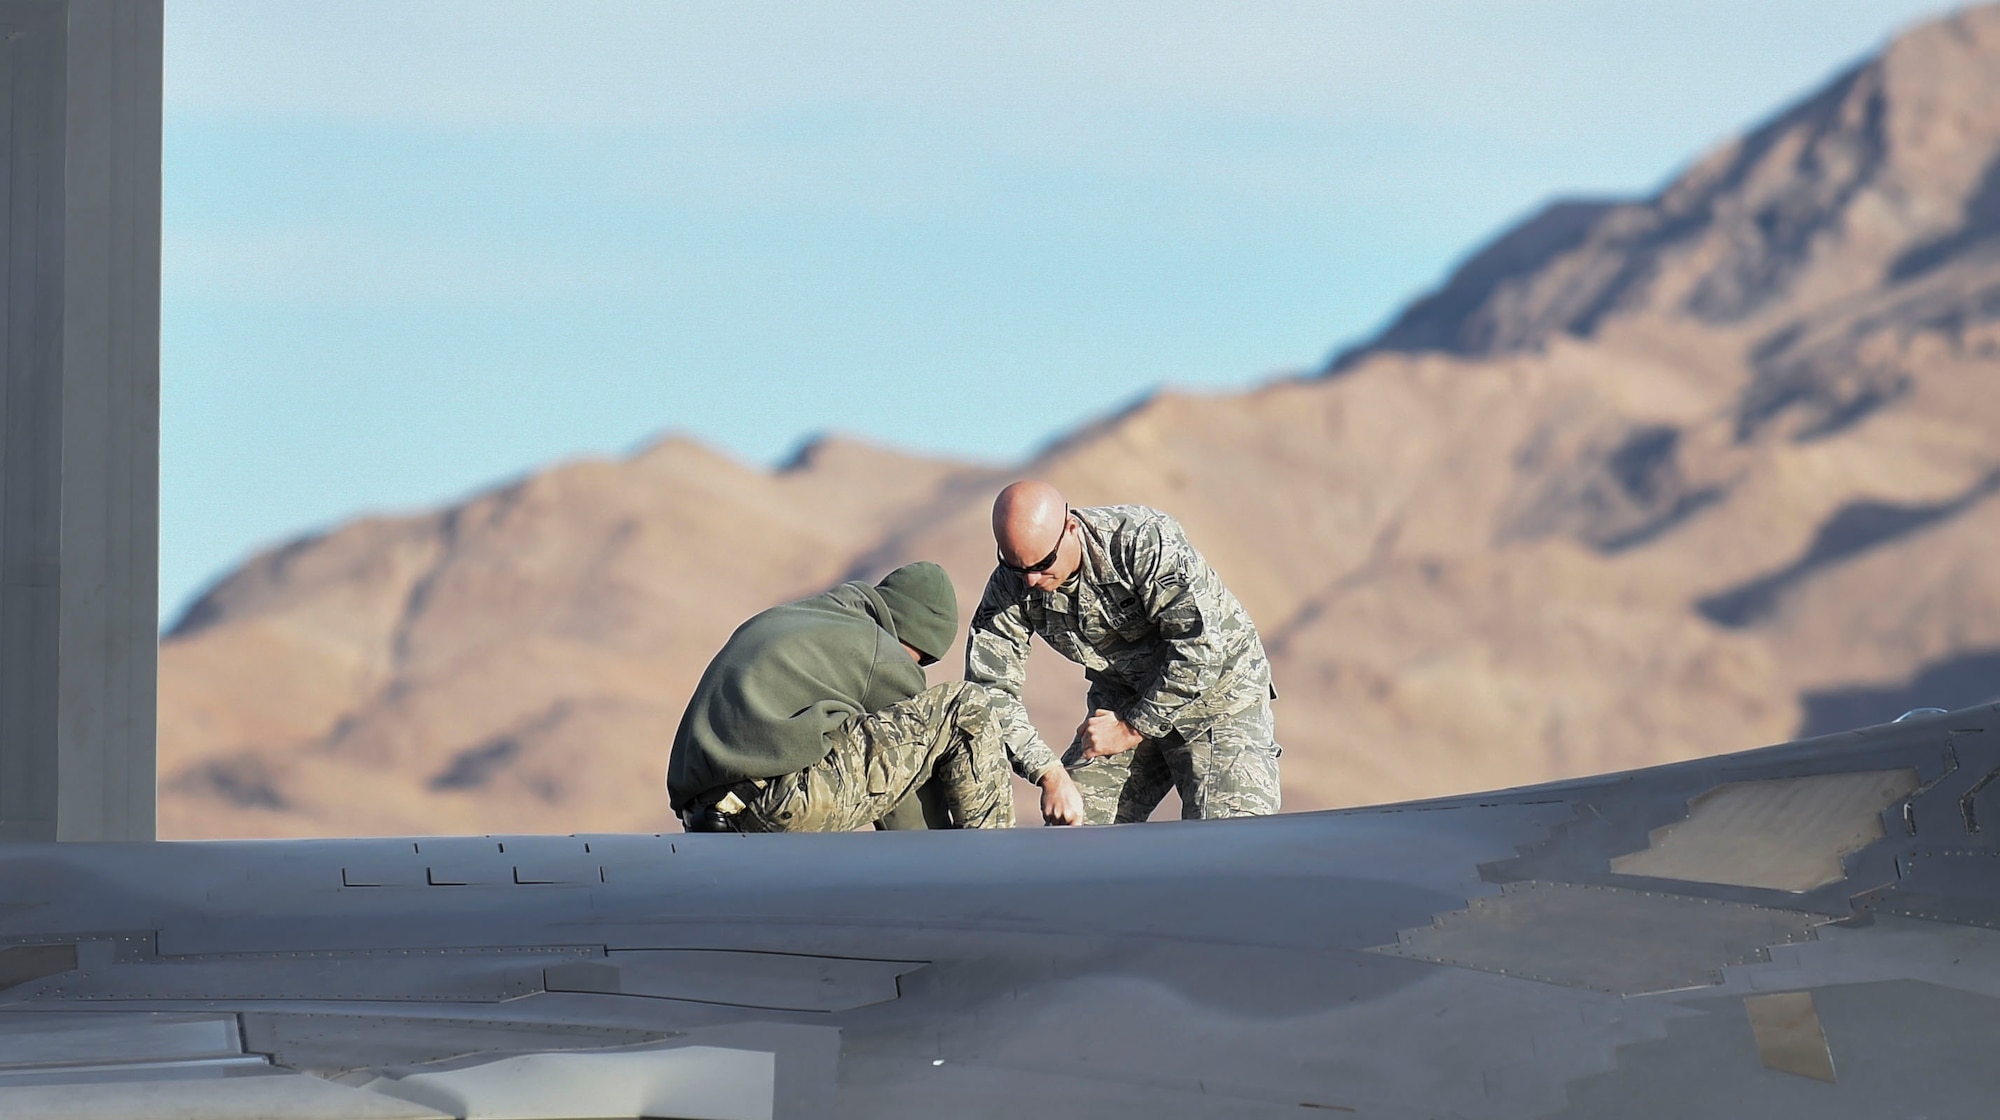 U.S. Air Force Airmen with the 1st Aircraft Maintenance Squadron conduct maintenance checks on an F-22 Raptors from the 1st Fighter Wing participating in Red Flag 17-1 at Nellis Air Force Base, Nev., Feb. 18, 2017. Raptor teams started participating in Red Flag in 2007 and have since proven themselves as a critical component of both air-to-air and air-to-ground missions. (U.S. Air Force photo by Staff Sgt. Natasha Stannard)